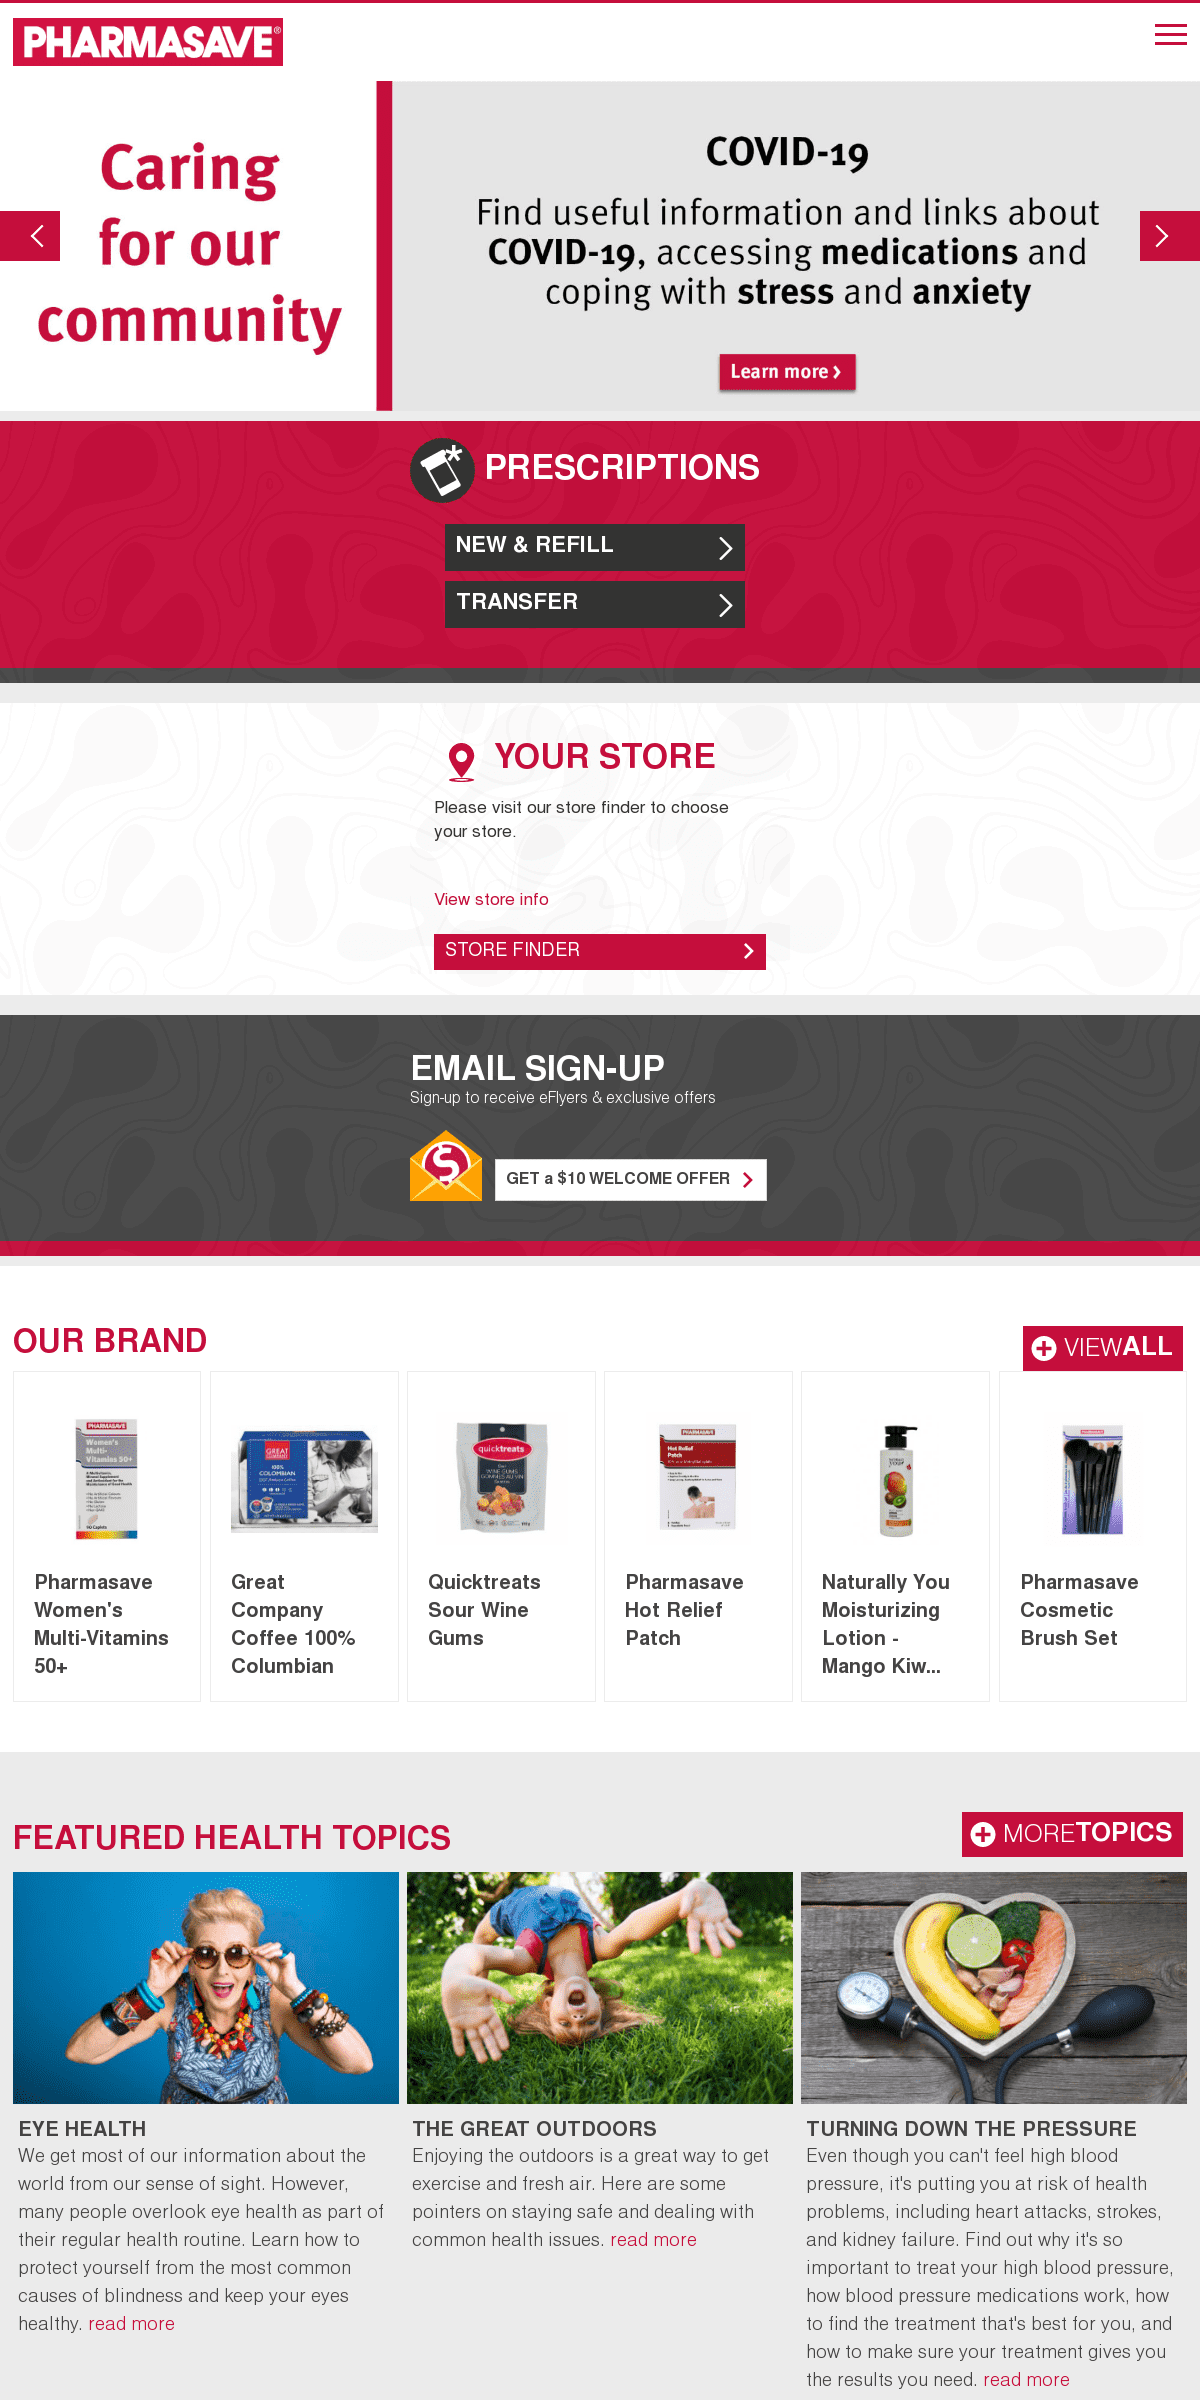 A complete backup of pharmasave.com